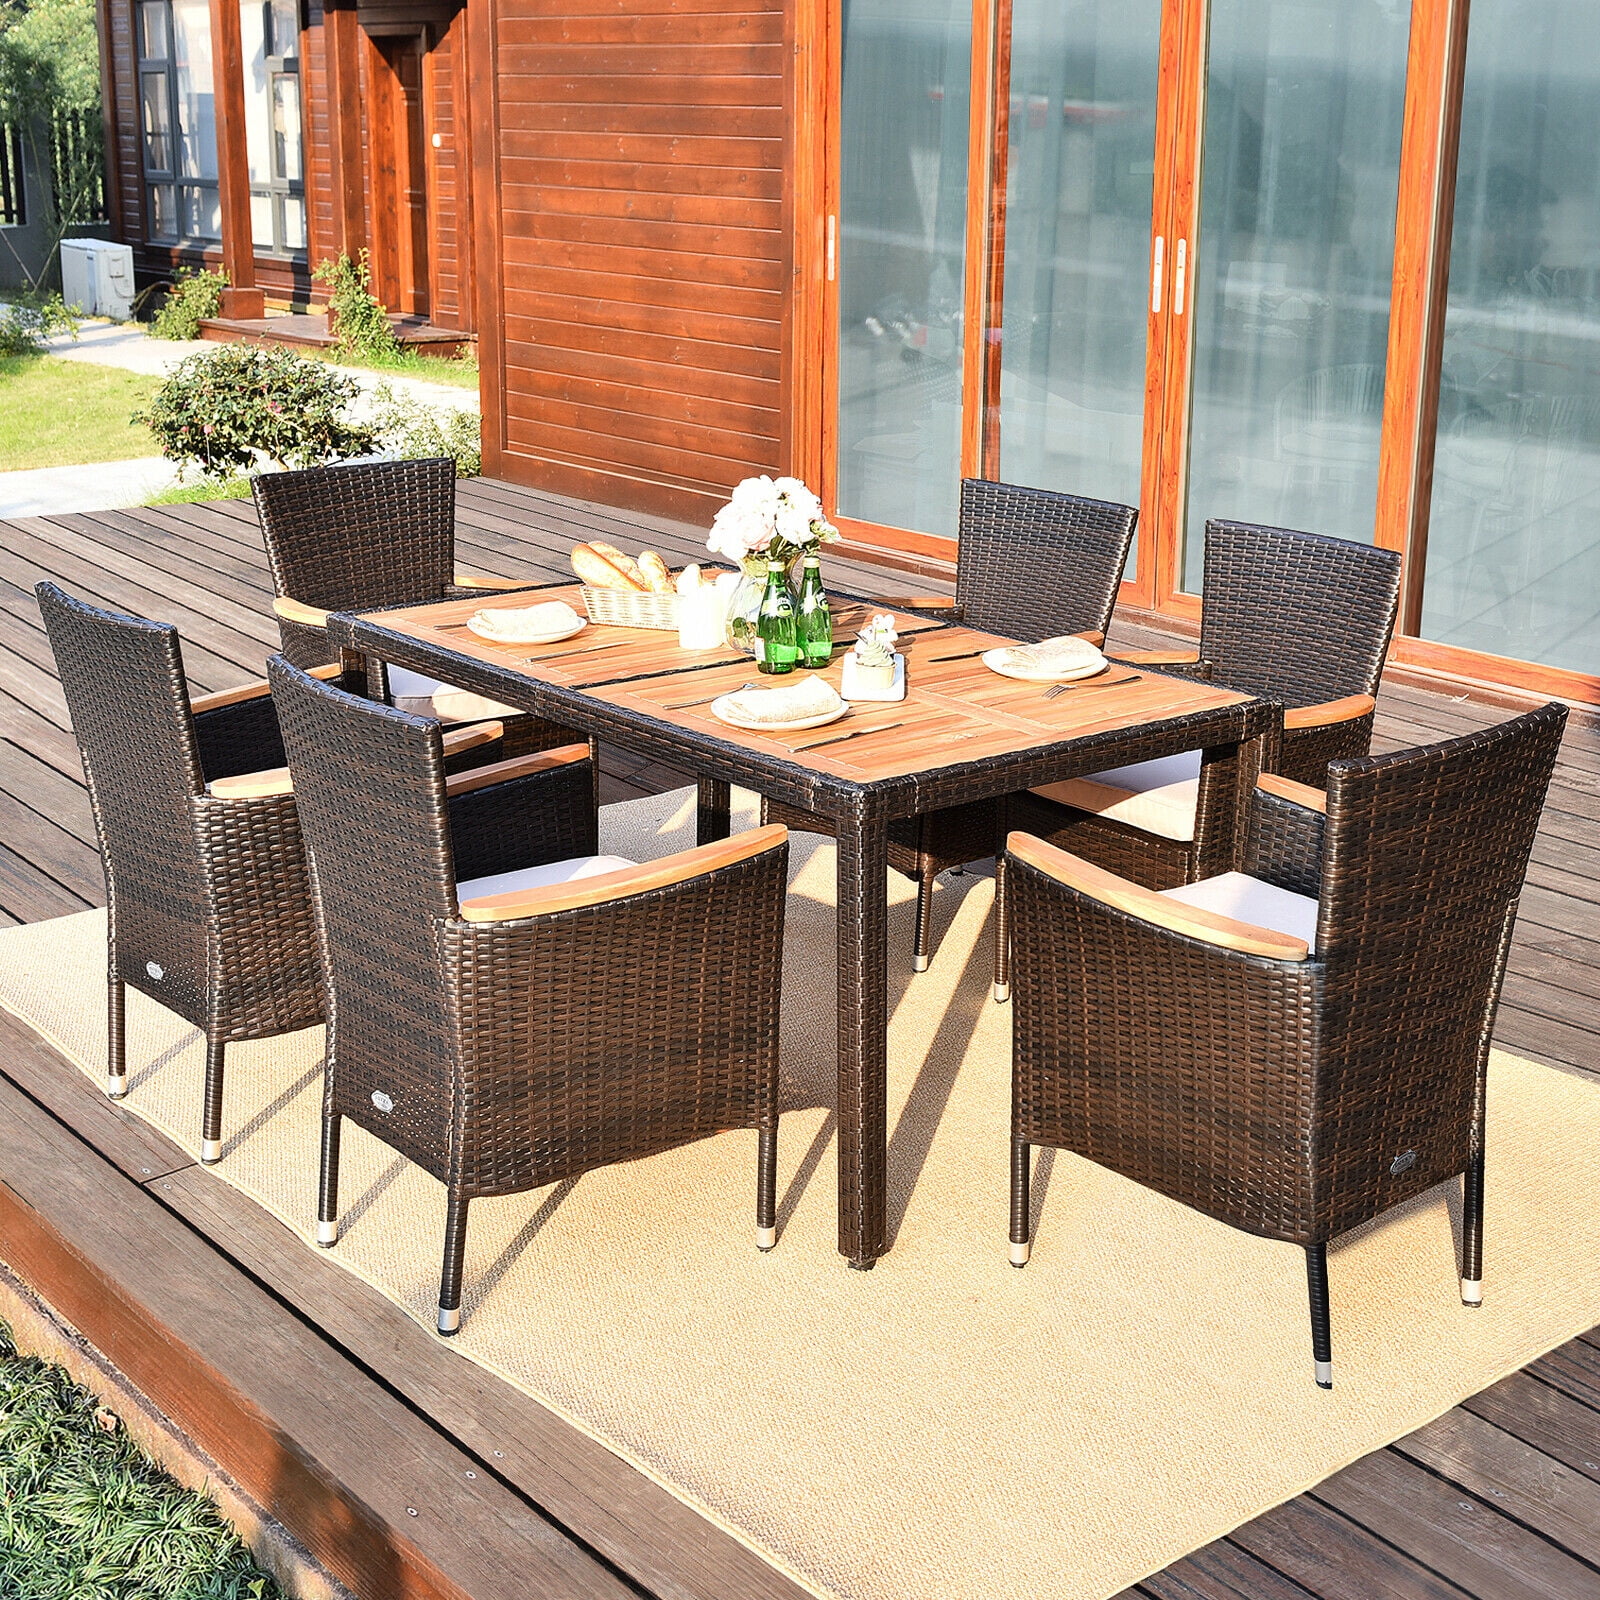 Gymax 7pcs Patio Rattan Dining Set 6, 7pcs Patio Rattan Cushioned Dining Set With Umbrella Hole Cover